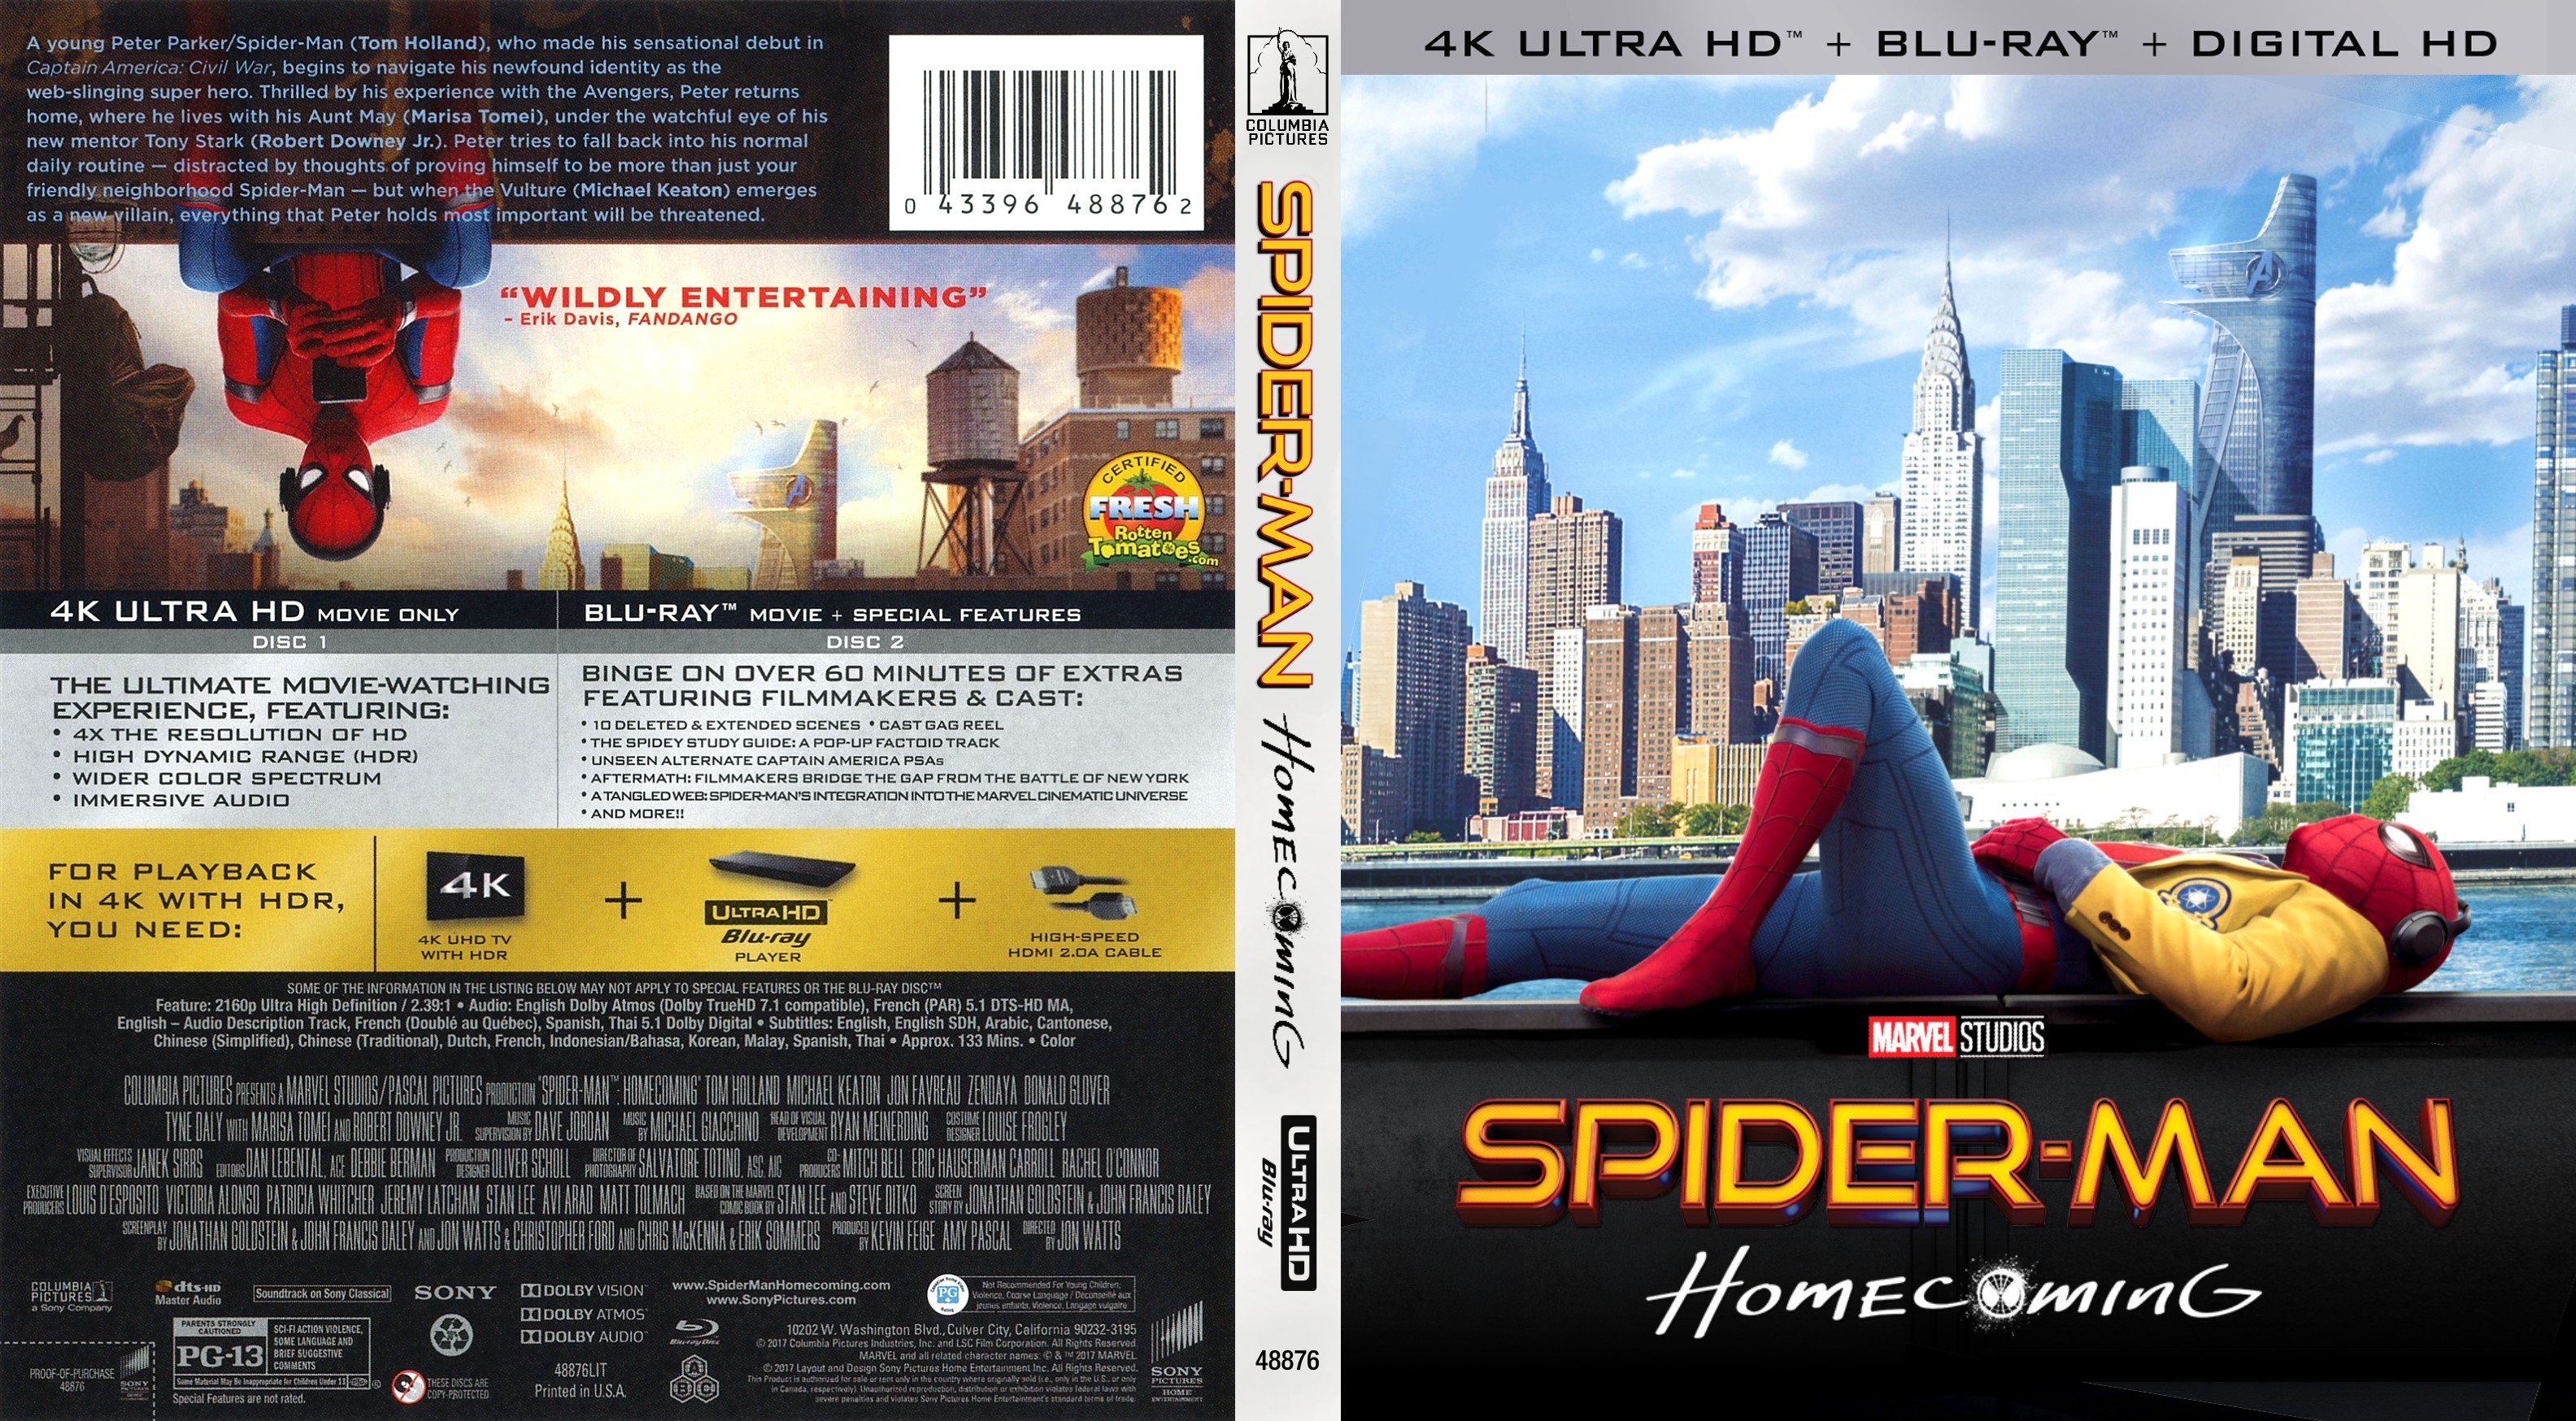 The cheapest tickets to the homecoming. Spider man Homecoming обложка. Человек-паук Blu-ray обложка. Spider-man: Homecoming Cover. Spider-man: Homecoming Cover DVD.